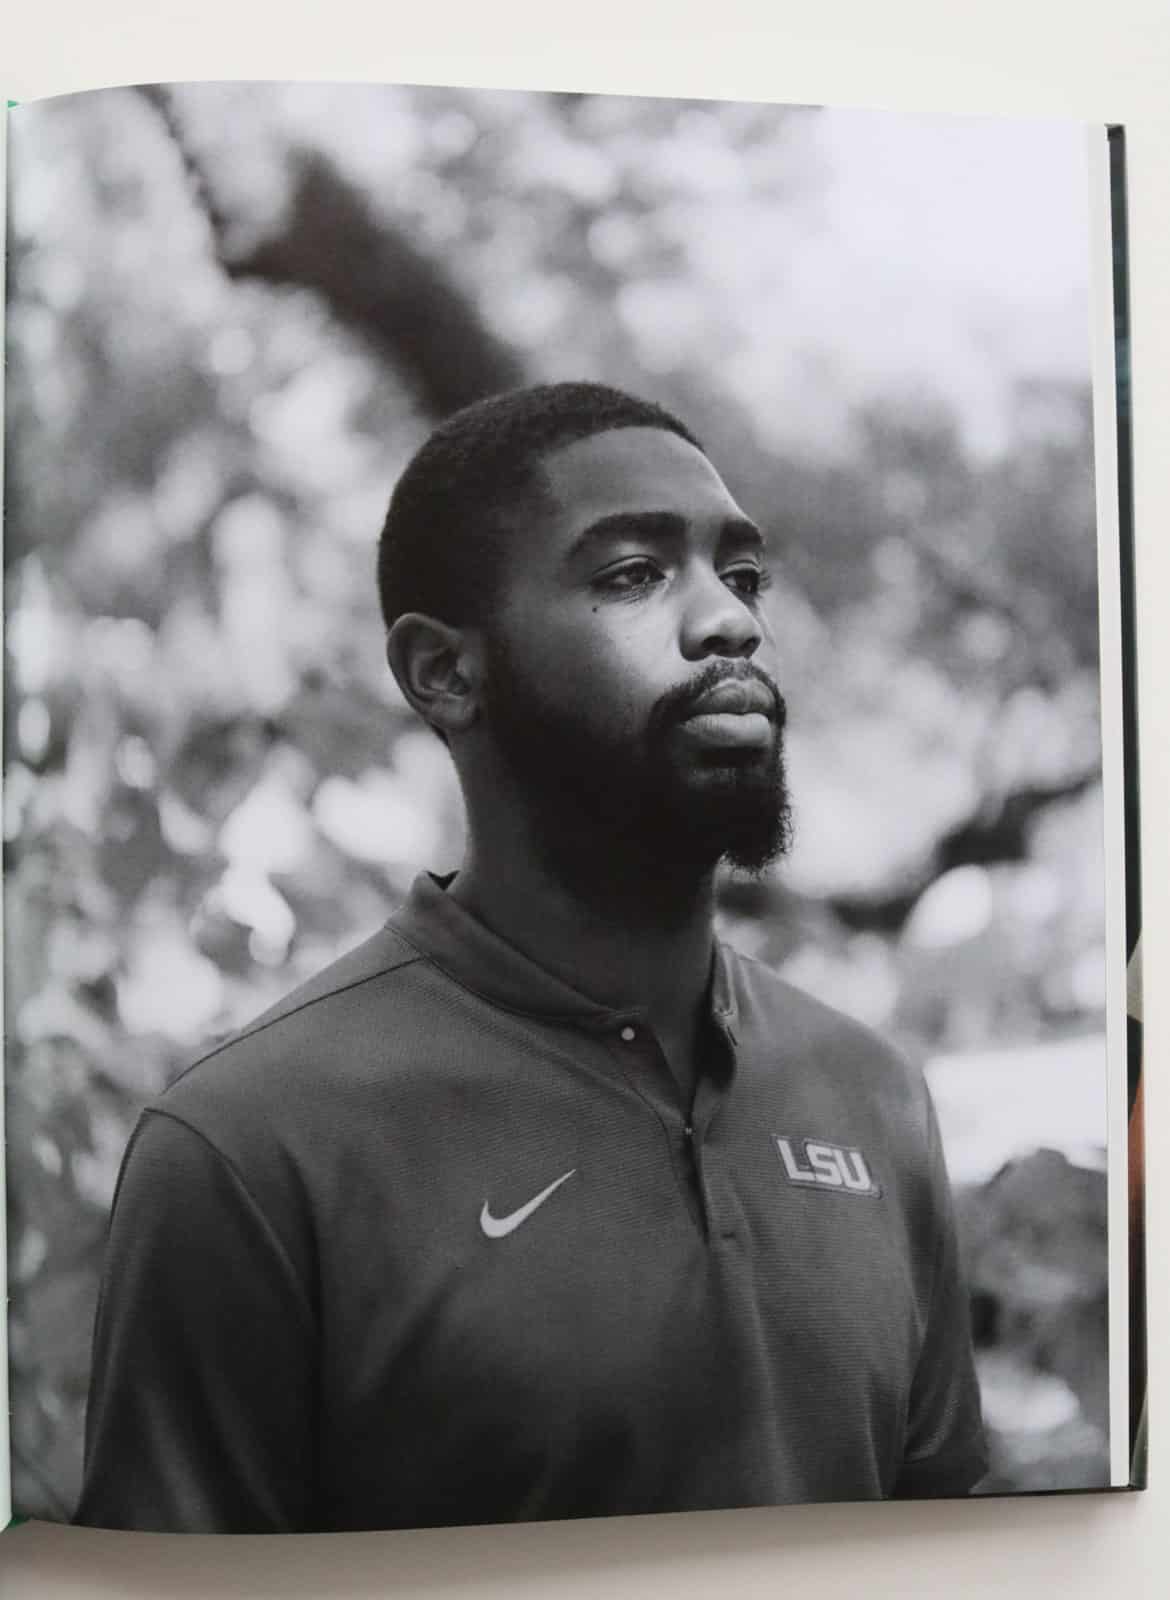 image of Javin Bowman from The Black Yearbook